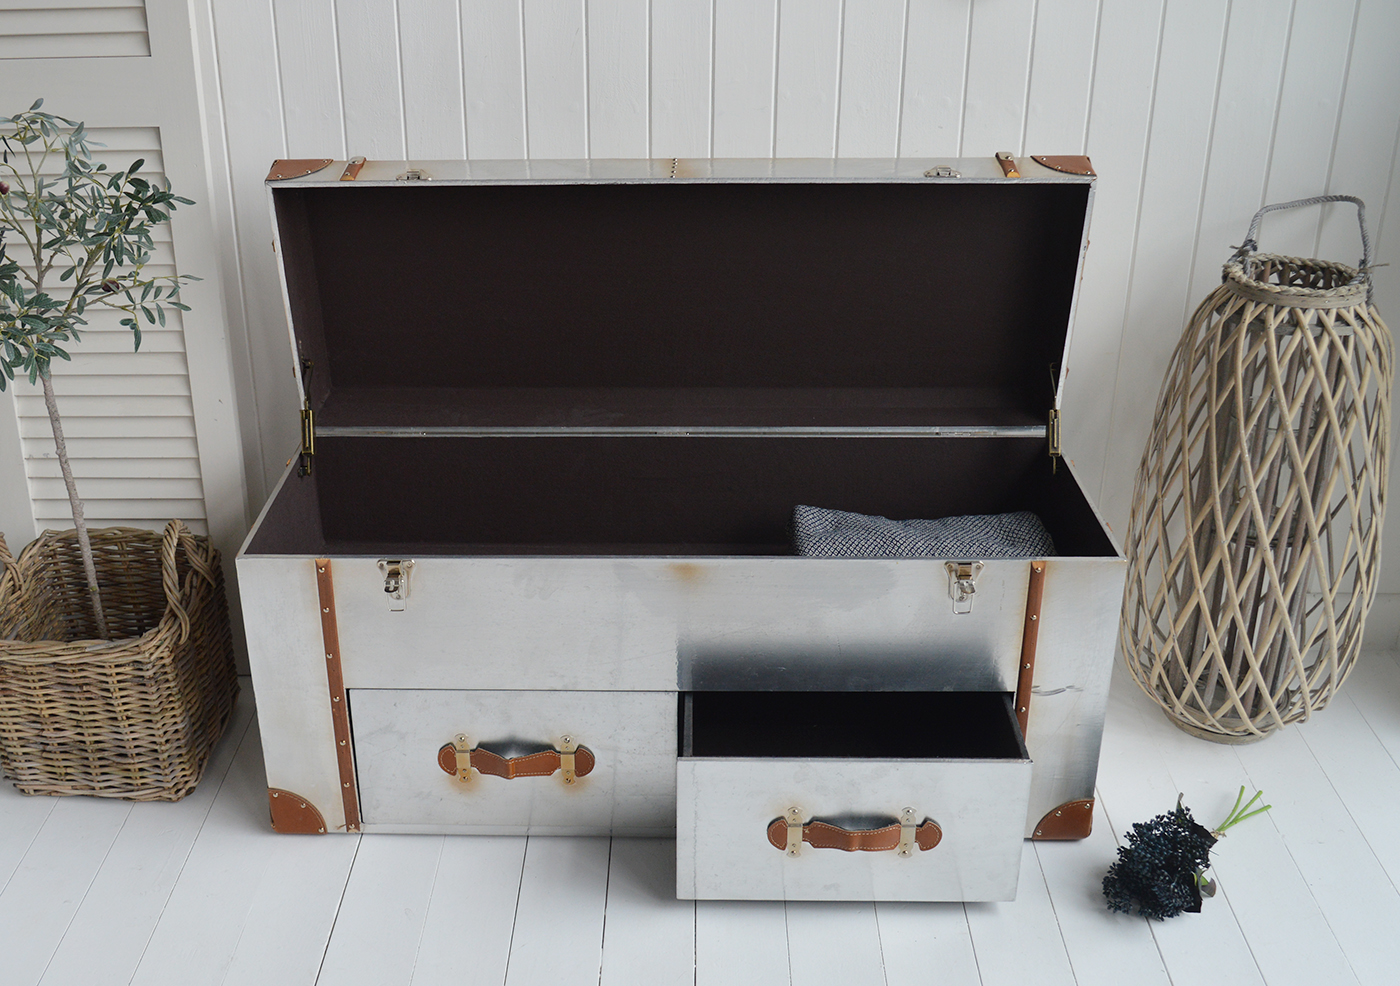 New England Furniture Style Furniture - Hall storage bench , tv stand or window seat with drawers for hall furniture. Perfect for coastal, country and modern farmhouse homes and interiors